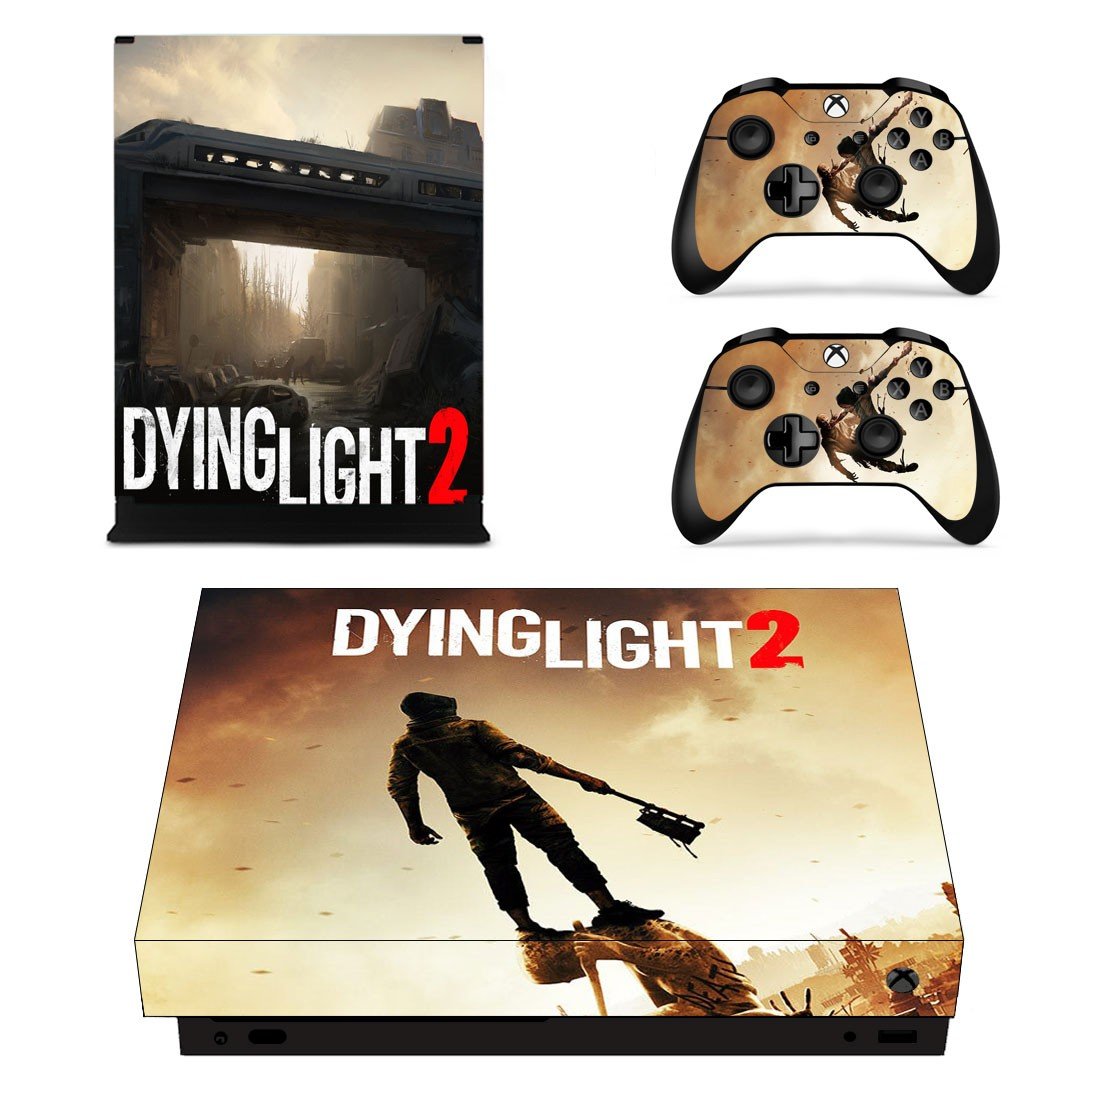 dying light 2 xbox one pre order